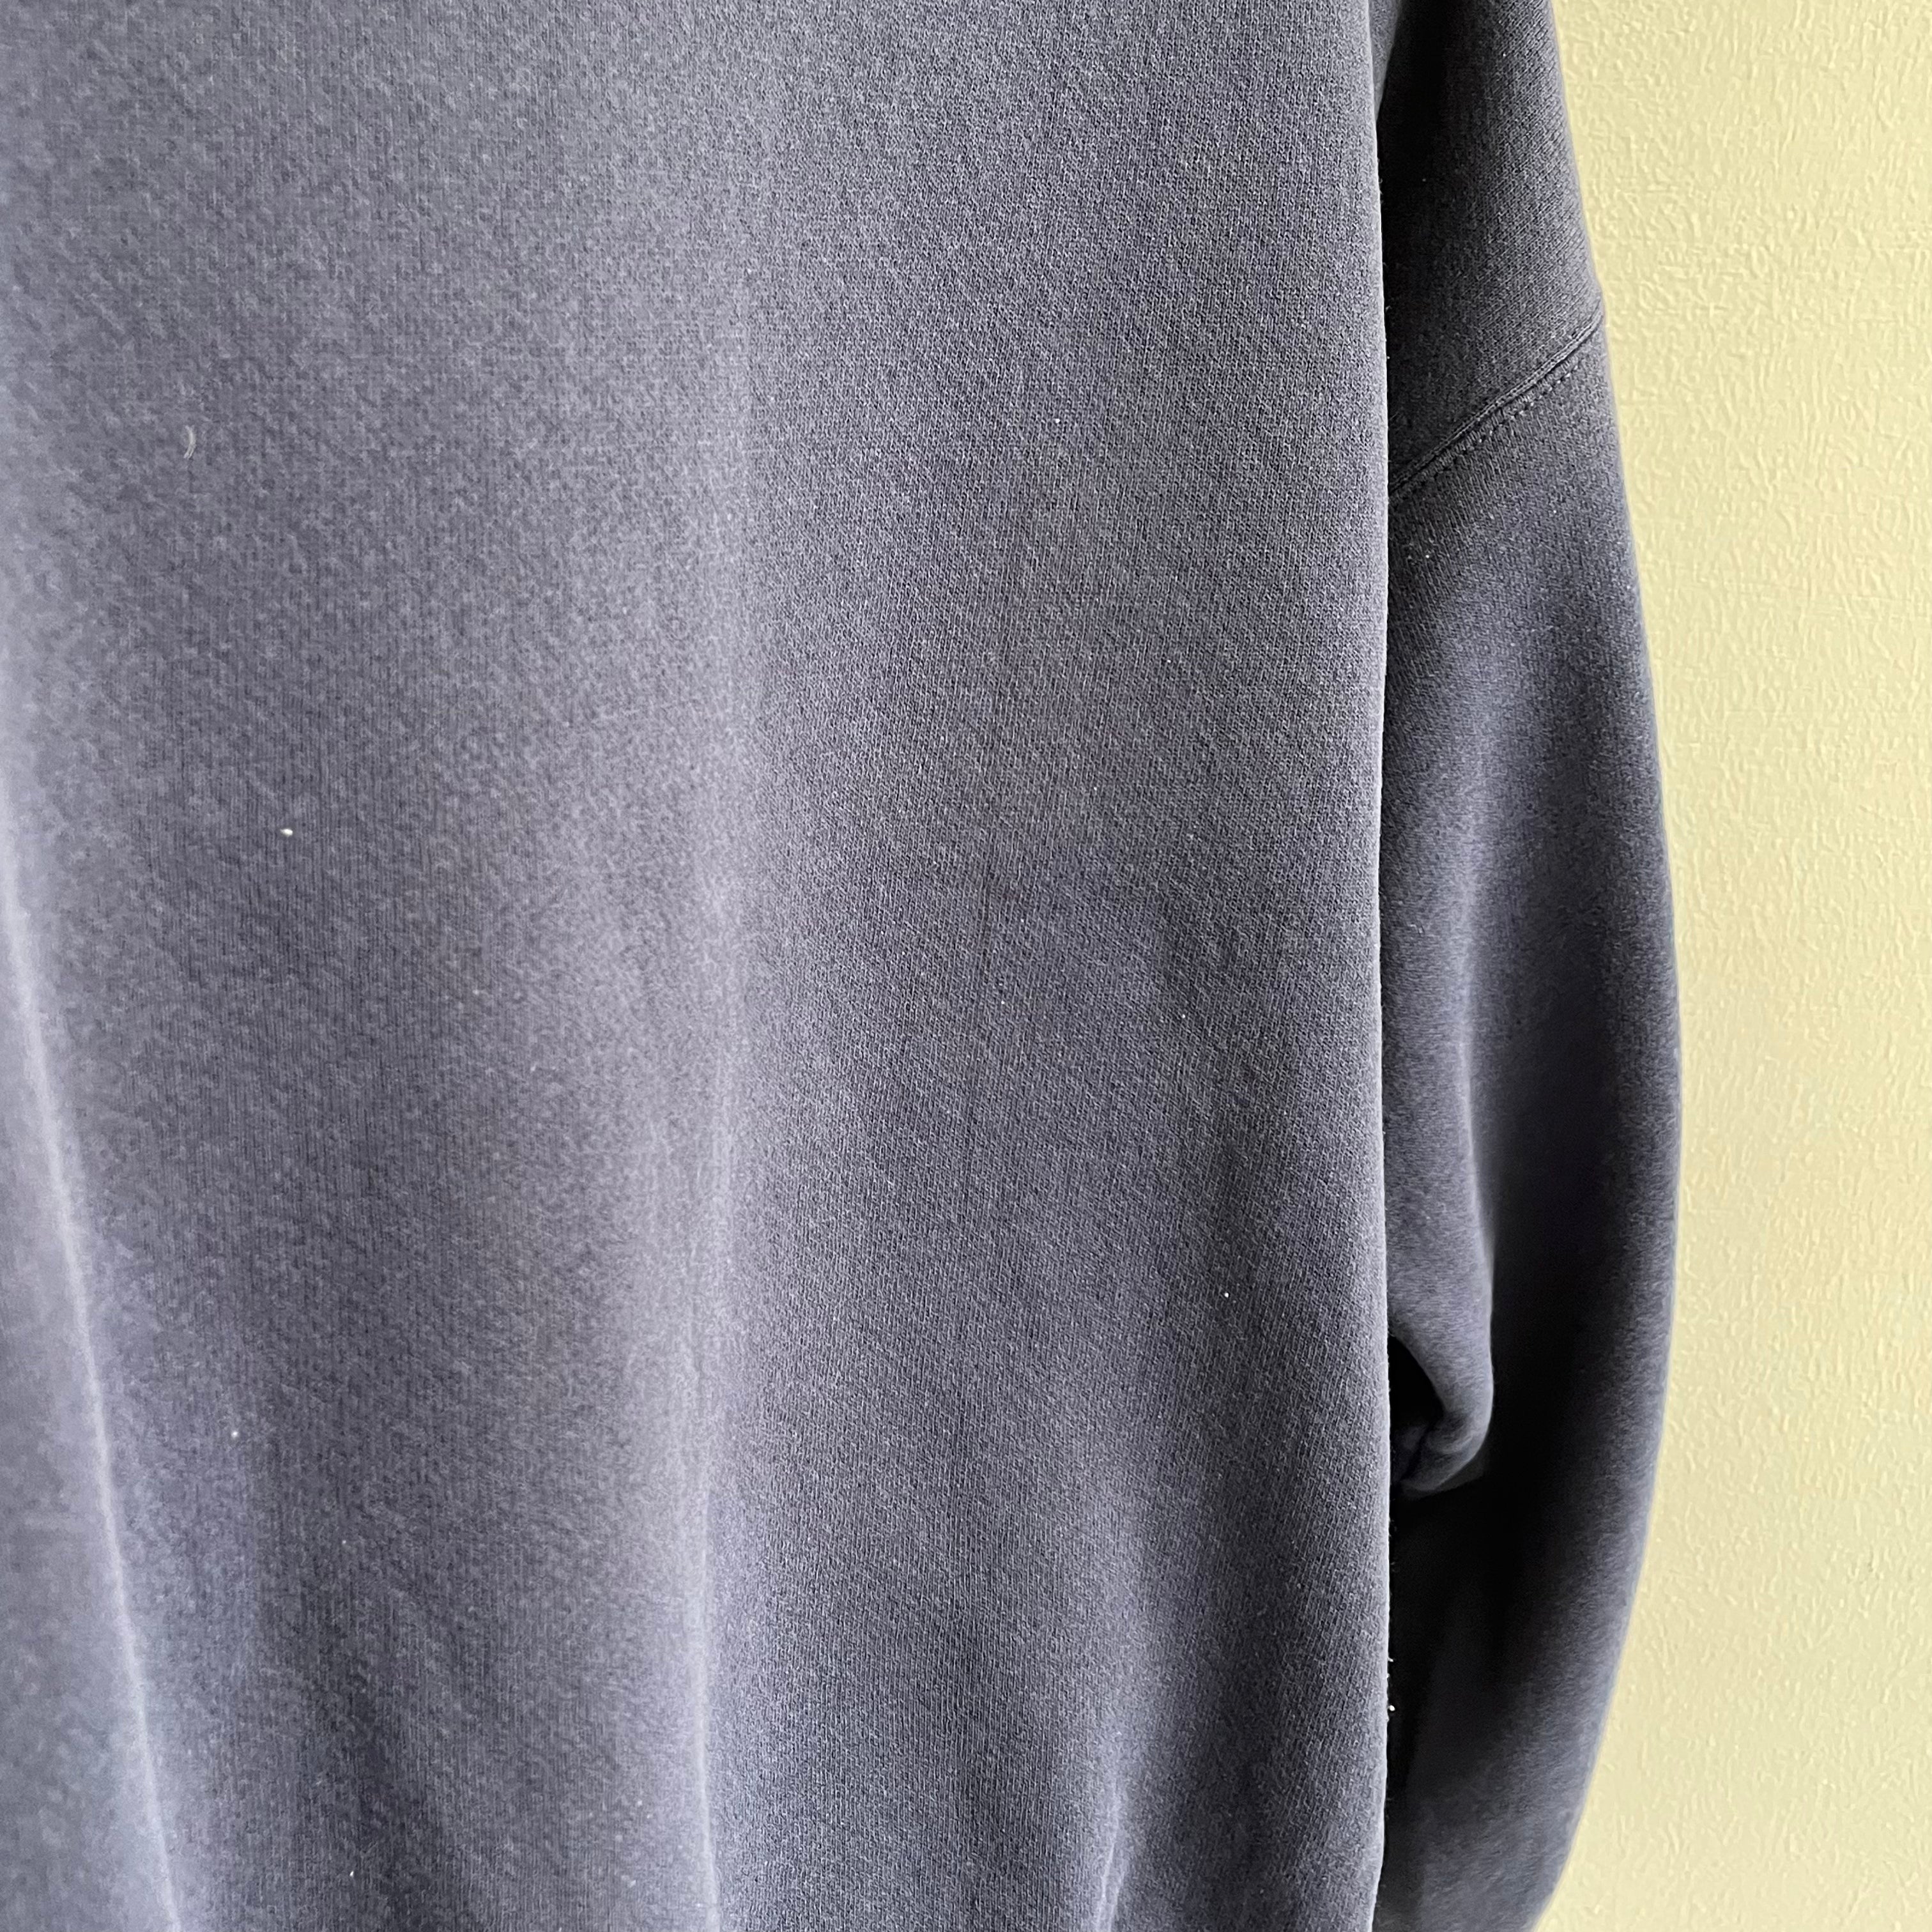 1990s Faded Blank Navy Single Gusset Oversized Sweatshirt by Discus